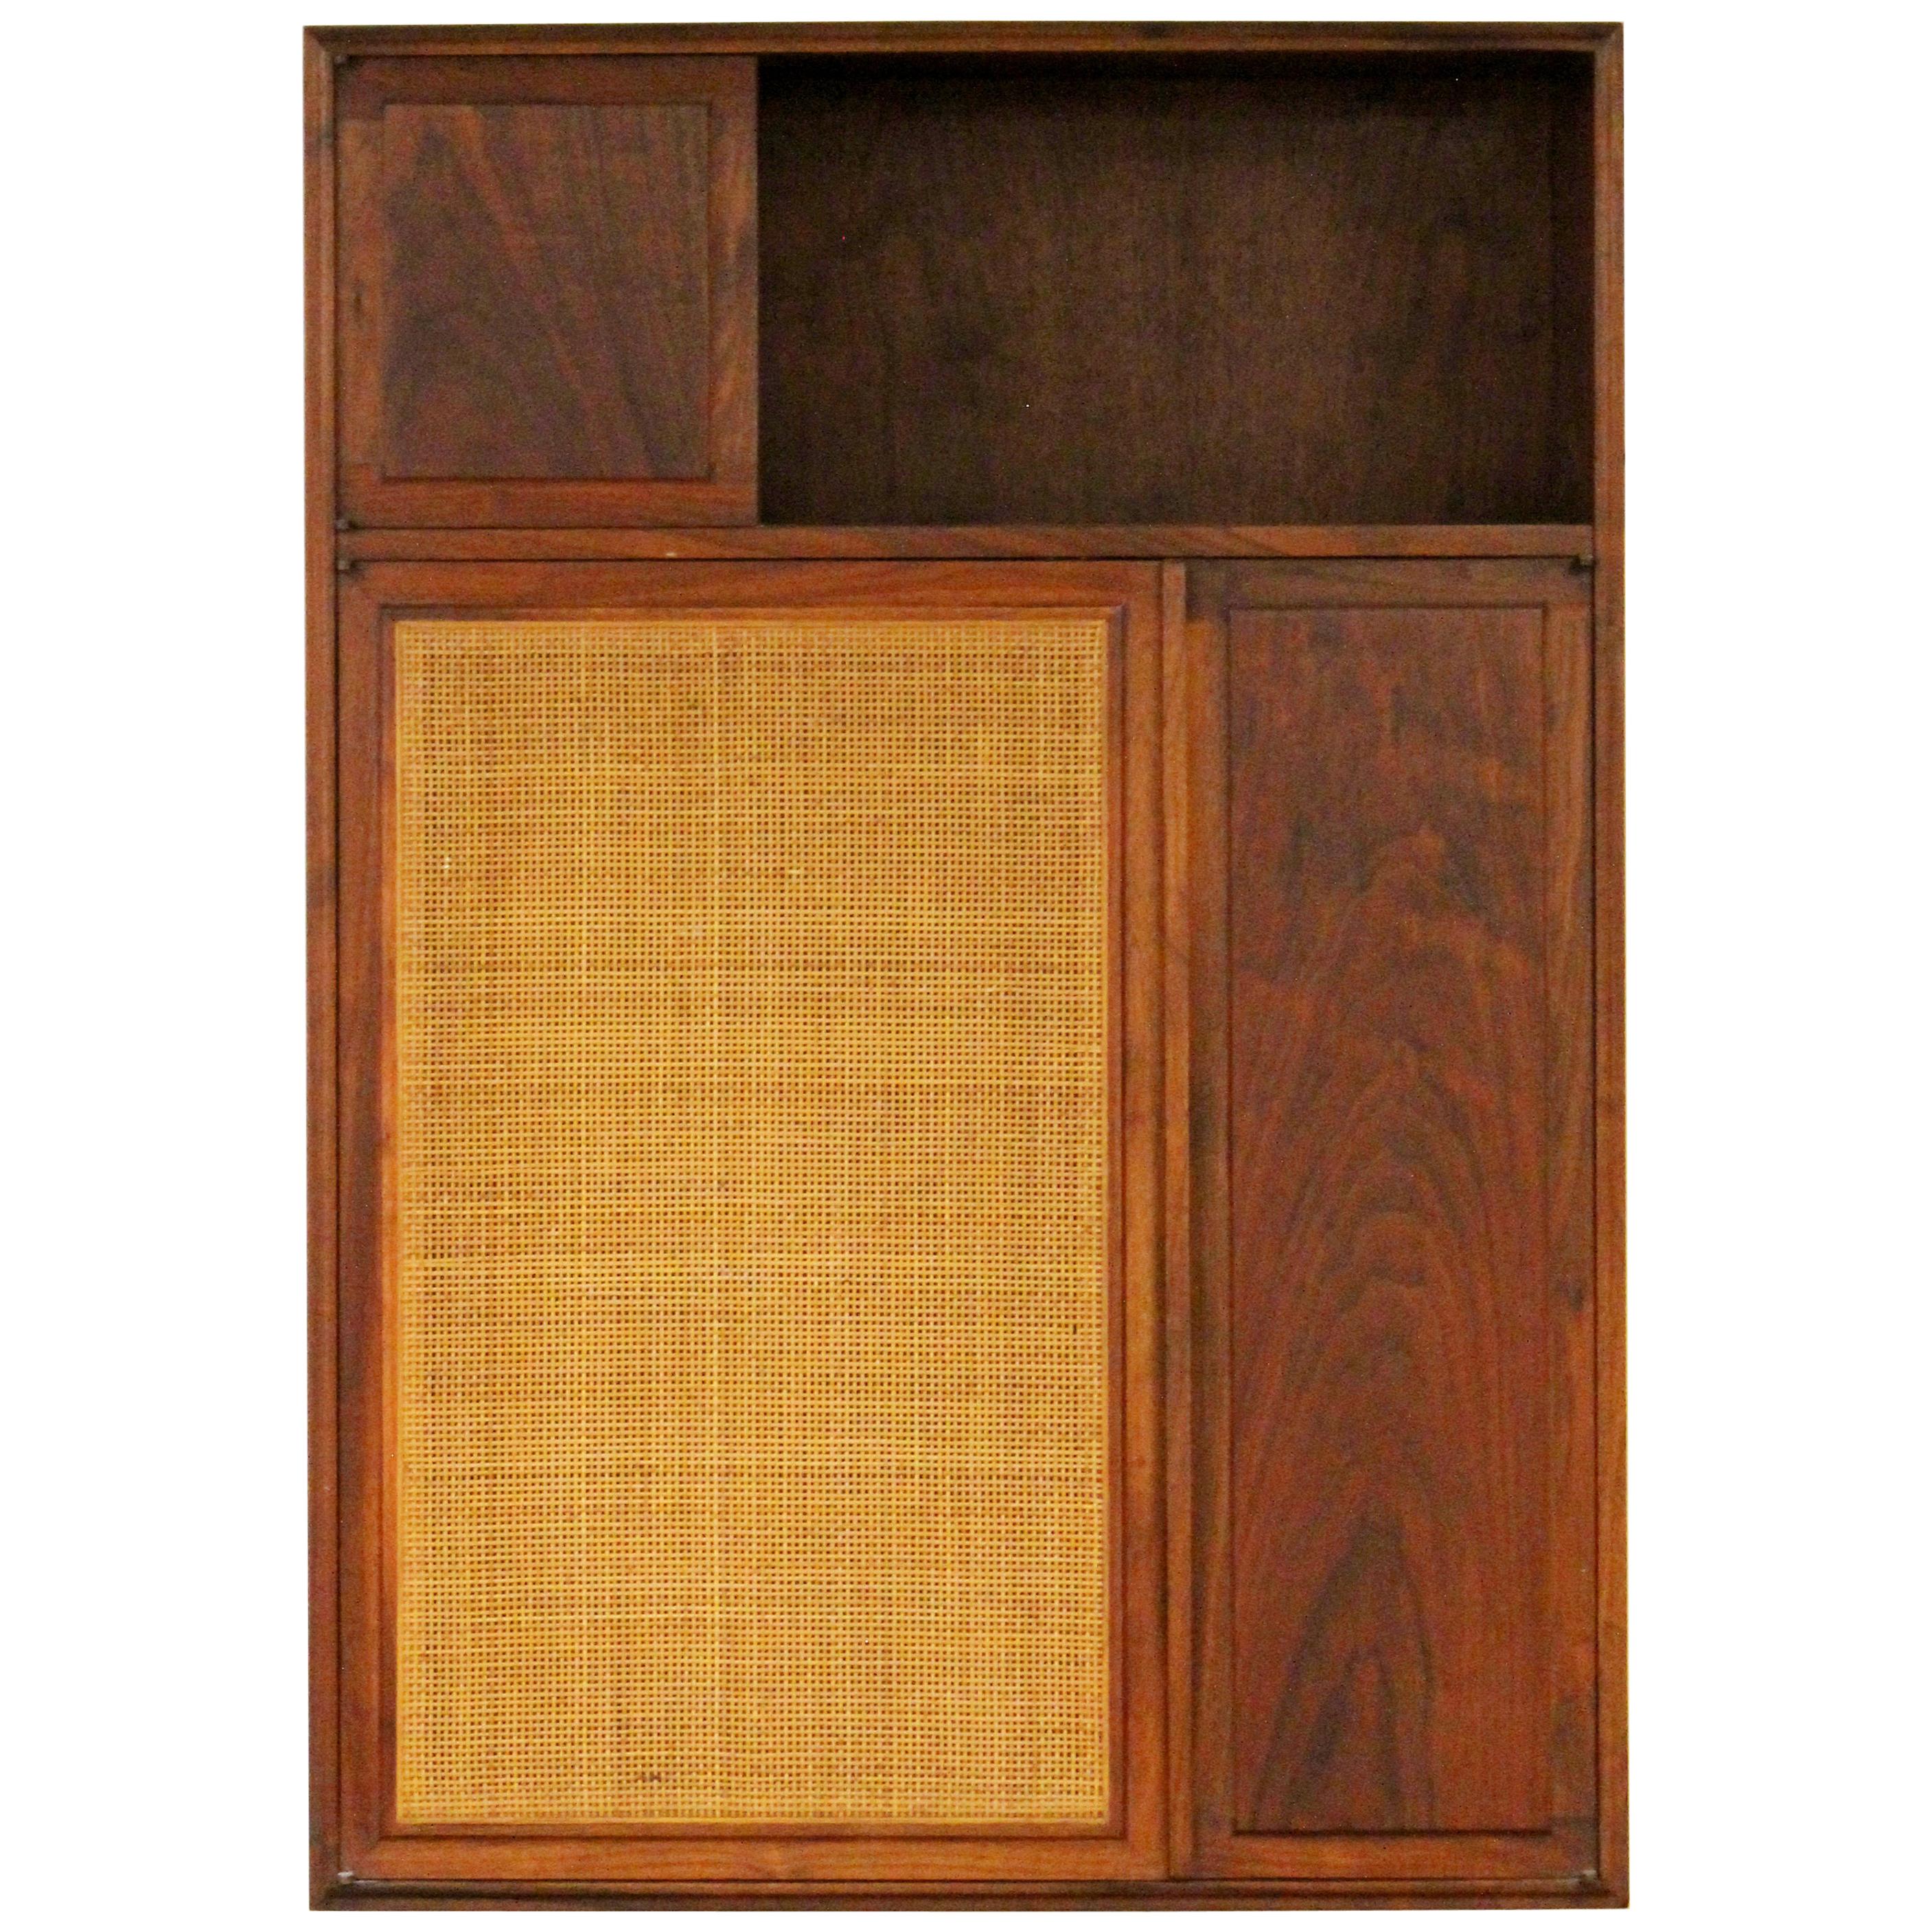 Mid-Century Modern Founders Walnut and Cane Hanging Wall Cabinet Shelving Unit